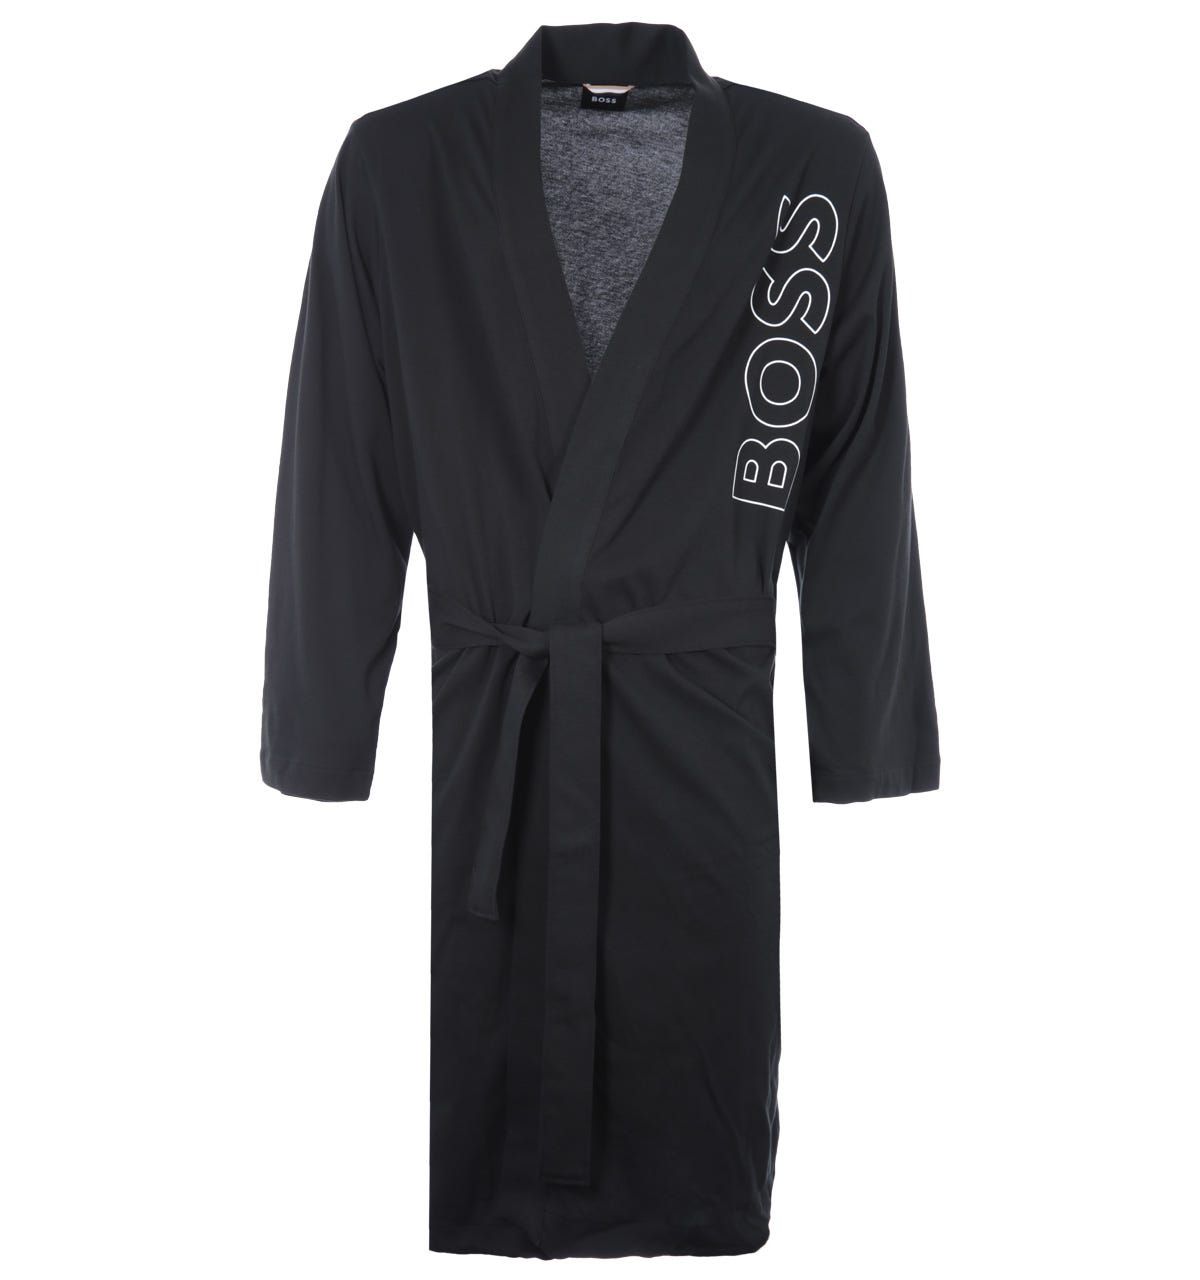 Wrap yourself in pure comfort with the Identity Logo Dressing Gown from BOSS. Crafted from pure heavyweight cotton in a wrap front style. Featuring a belt tie and side seam pockets.  Finished with the iconic BOSS logo in an outline print.Regular Fit, Pure Heavyweight Cotton, Wrap Front with Belt Tie, Side Seam Pockets, BOSS Branding. Style & Fit:Regular Fit, Fits True To Size. Composition & Care:100% Cotton, Machine Wash.